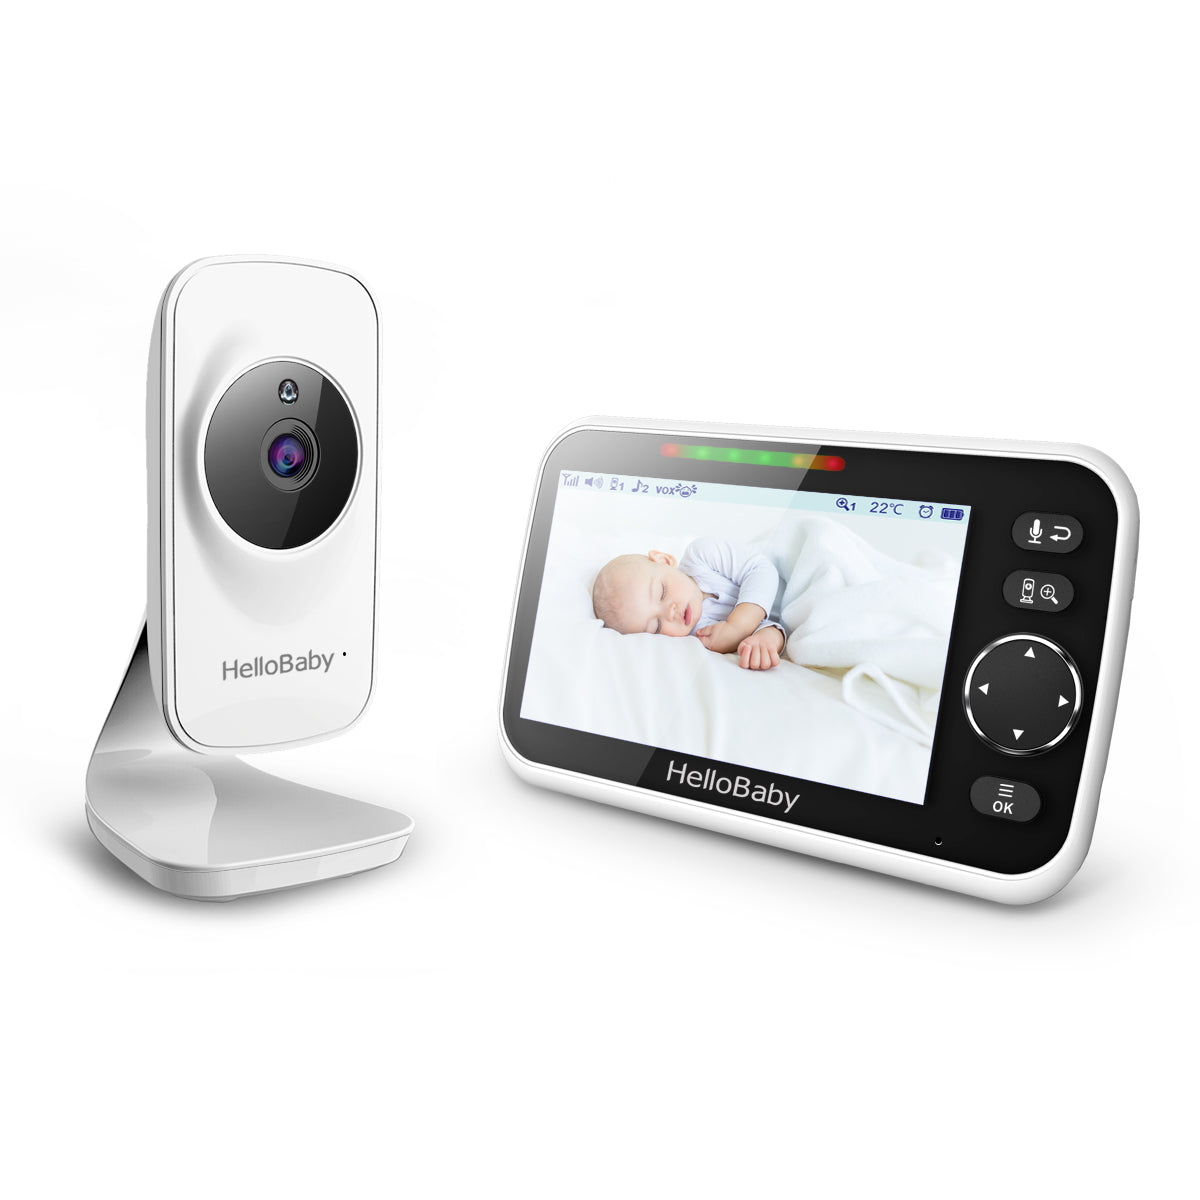 Hellobaby Video Monitor. Hb30 11,999/- *Feature and details  👶Multi-function & Compatibility：Hello baby video baby monitor has more…